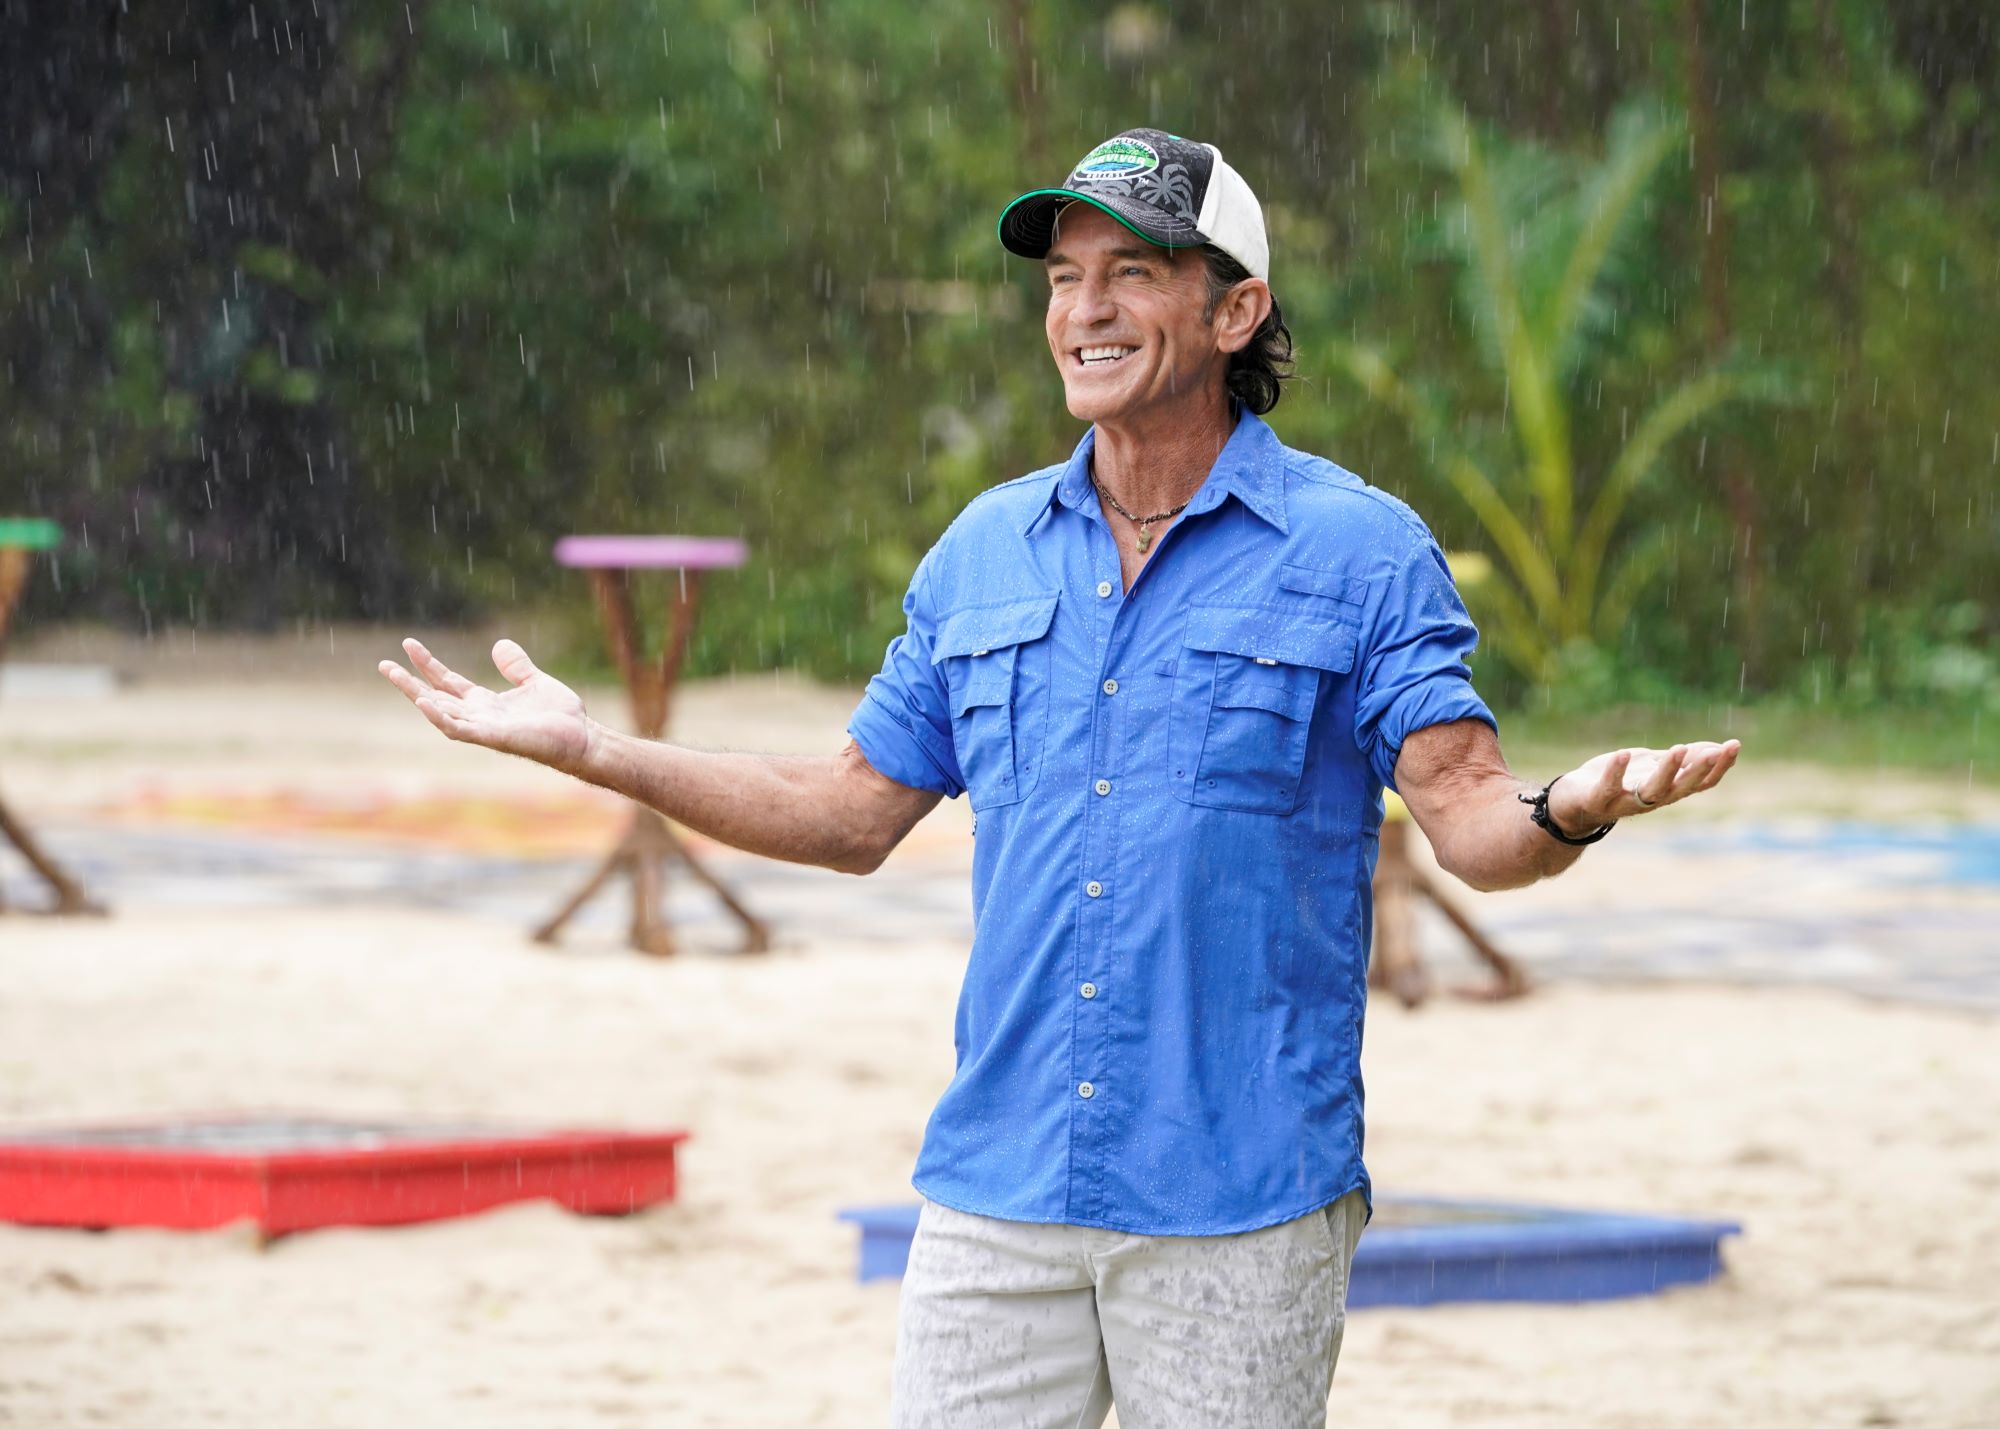 'Survivor' Season 43 host Jeff Probst wears a light blue shirt, tan pants, and a black, white, and green 'Survivor' baseball cap while standing in the rain.